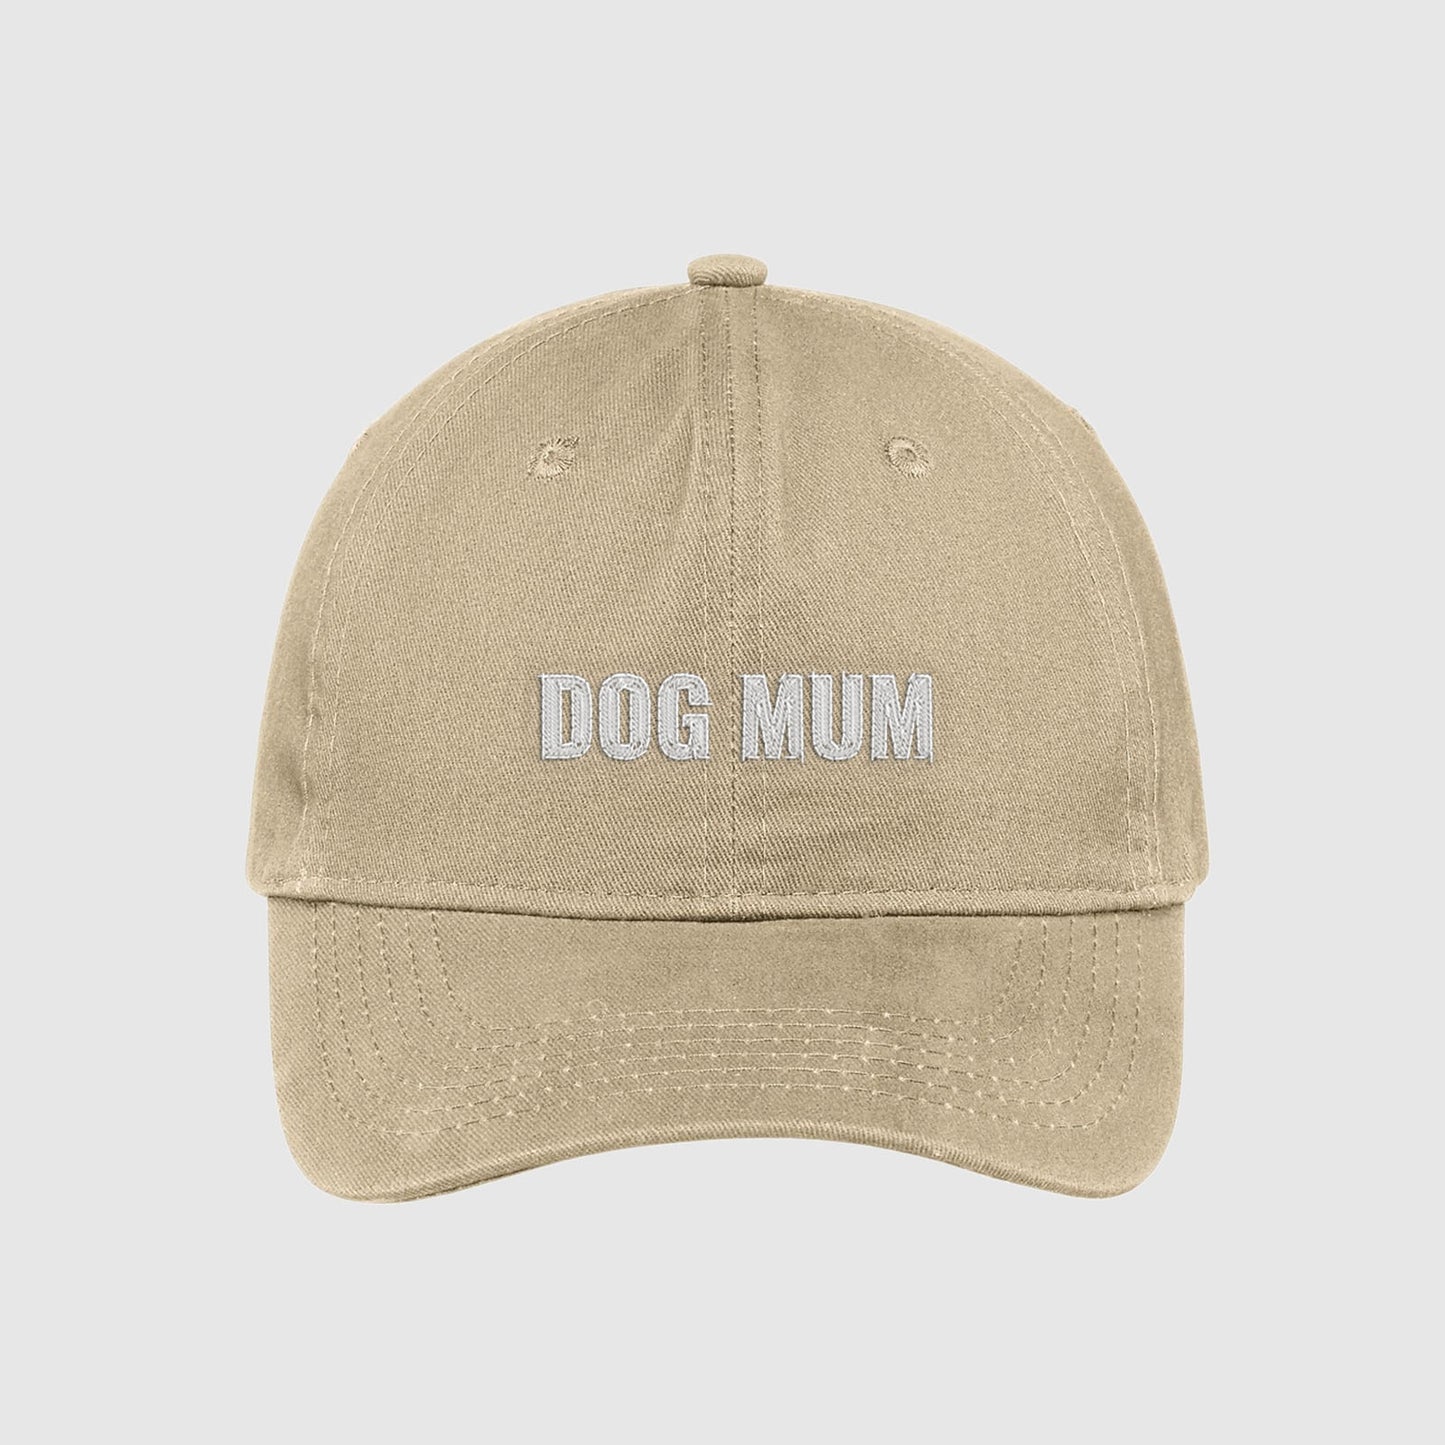 Tan Dog Mum Hat embroidered with white text.